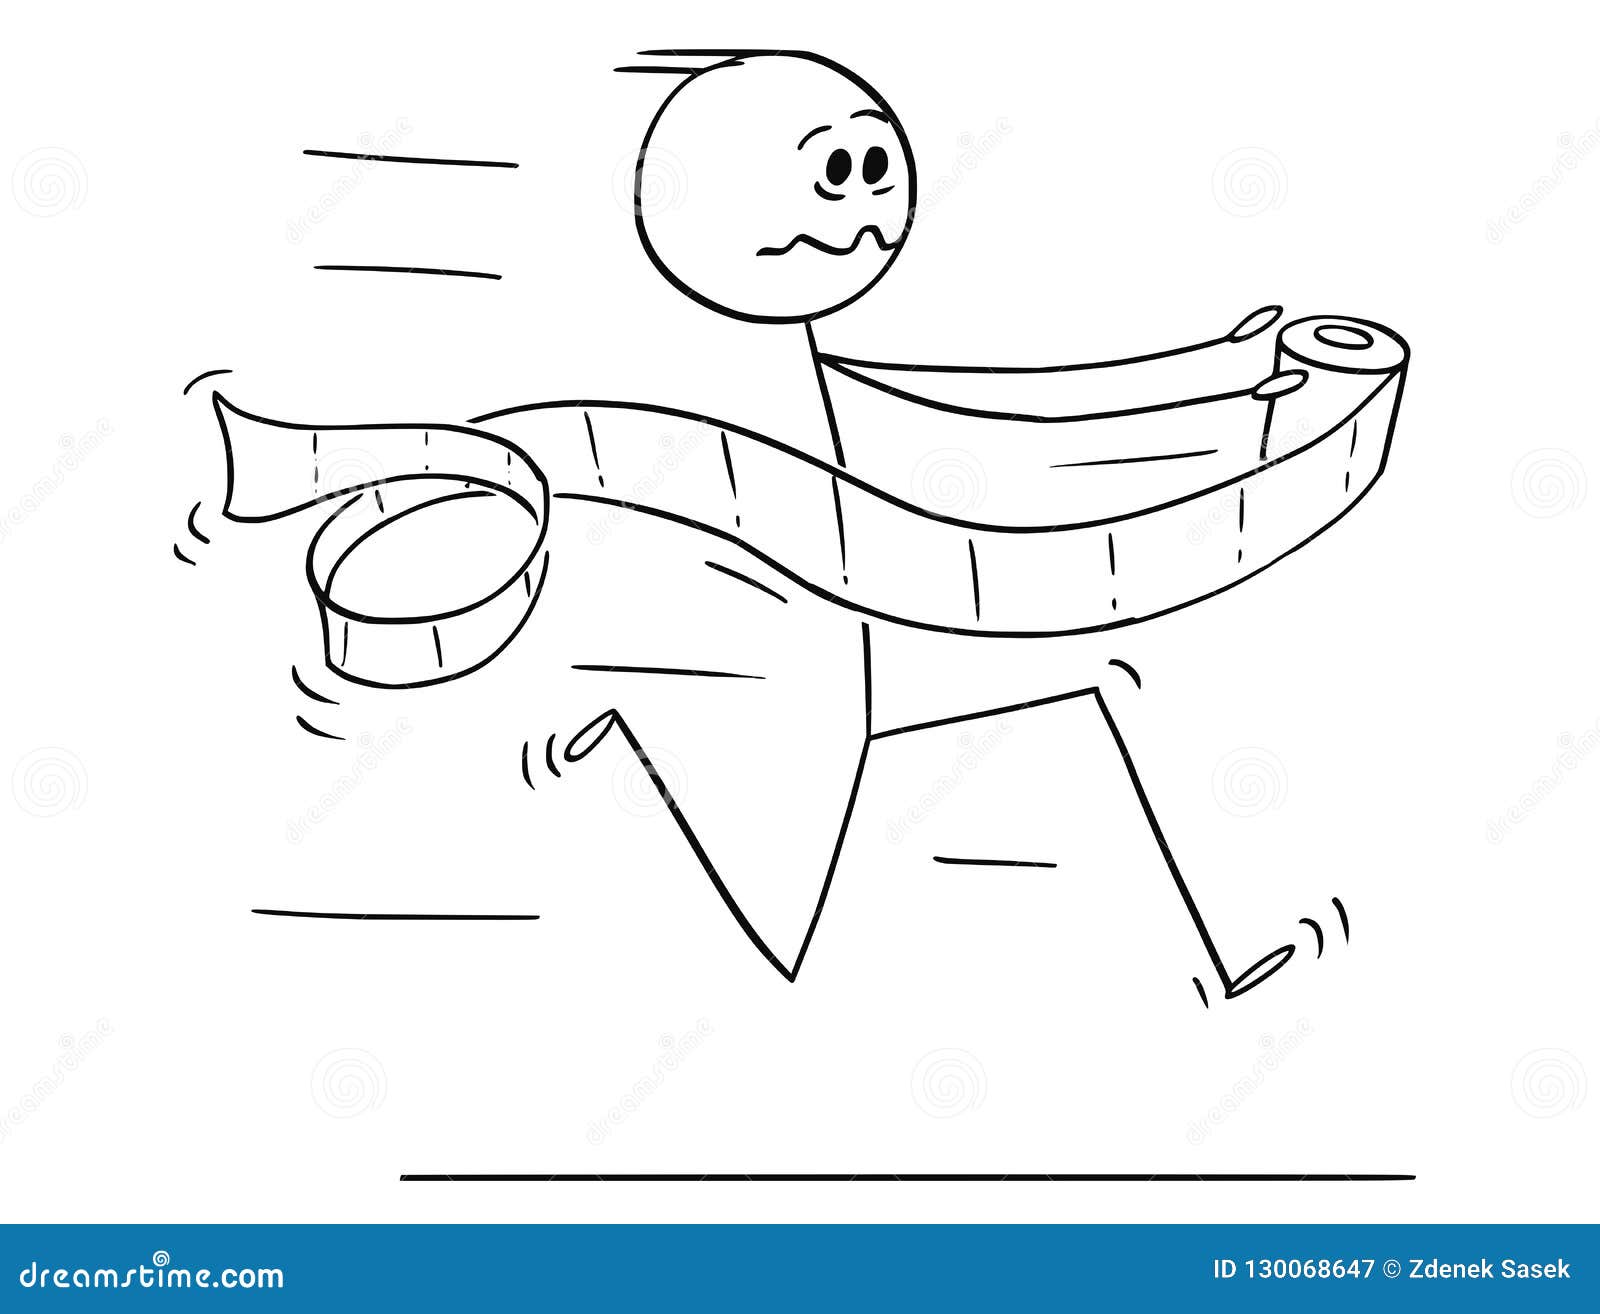 cartoon of man running in panic to toilet or bathroom or lavatory with toilet paper in hand